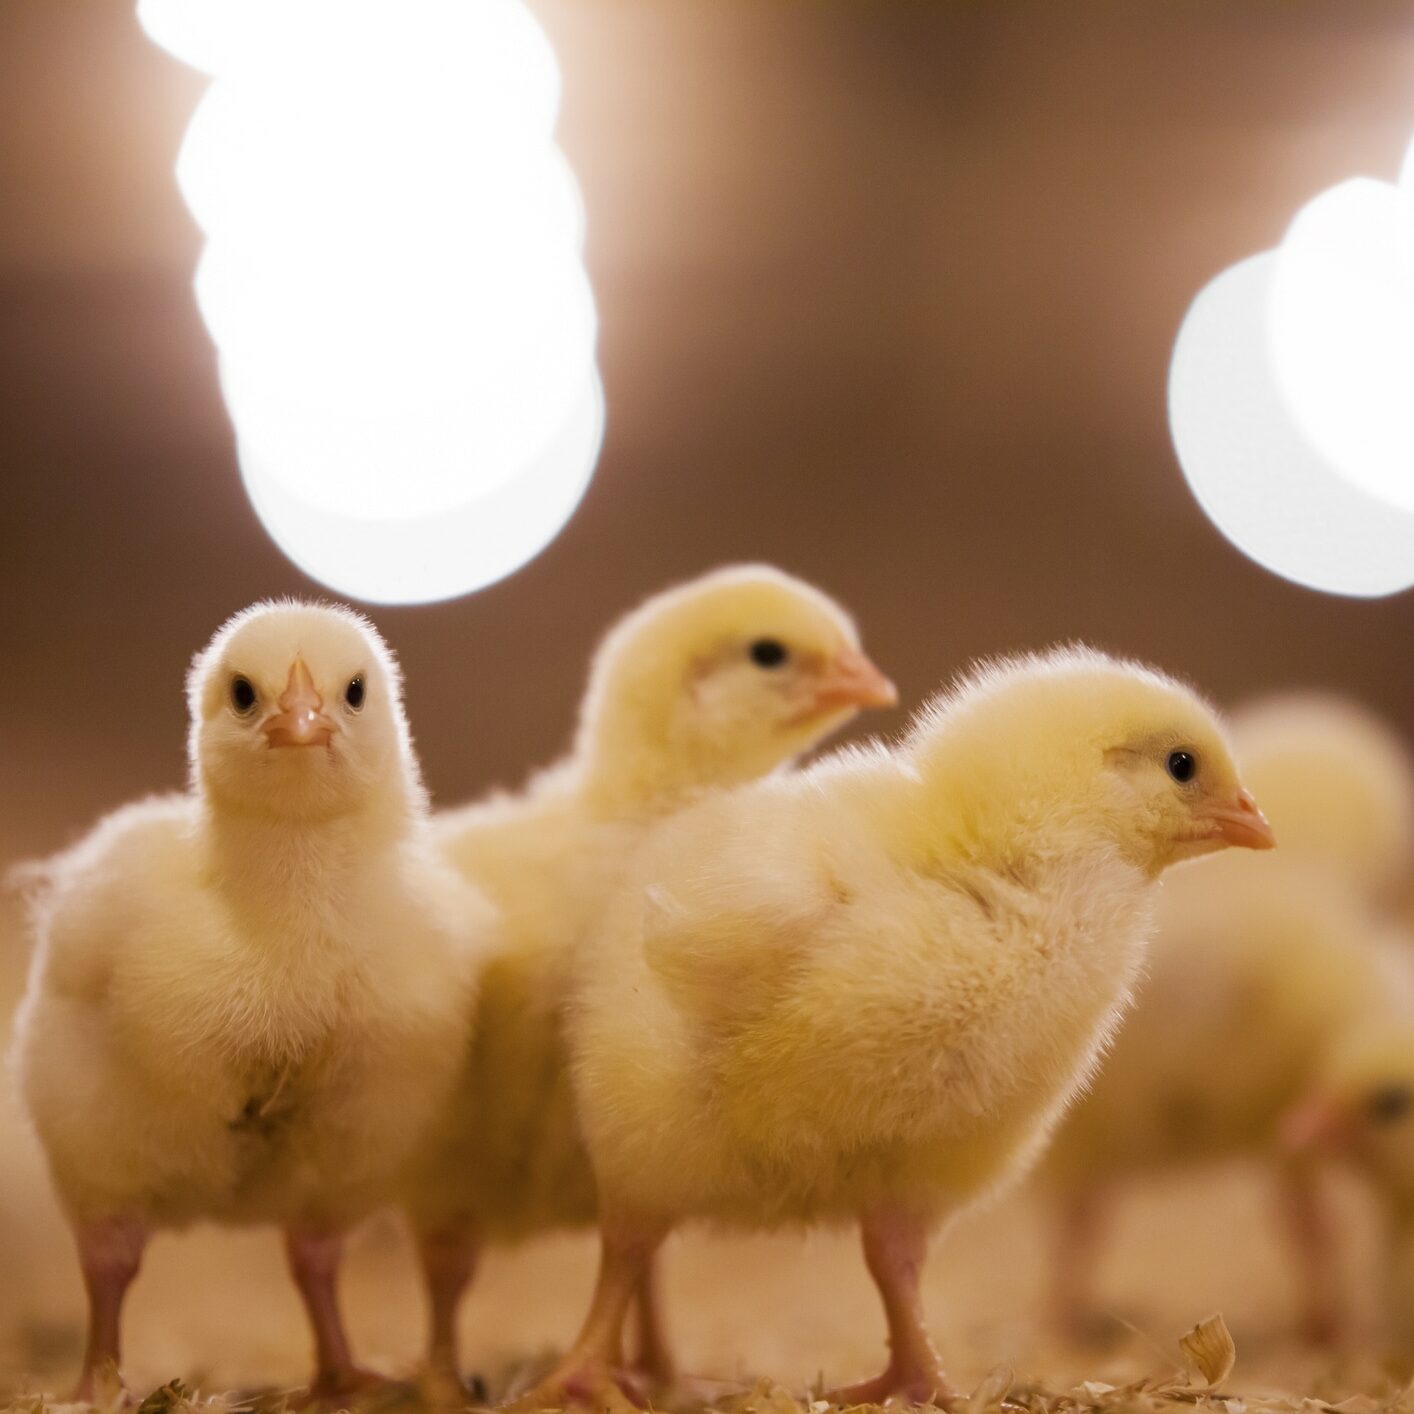 Chicks in poultry barn.